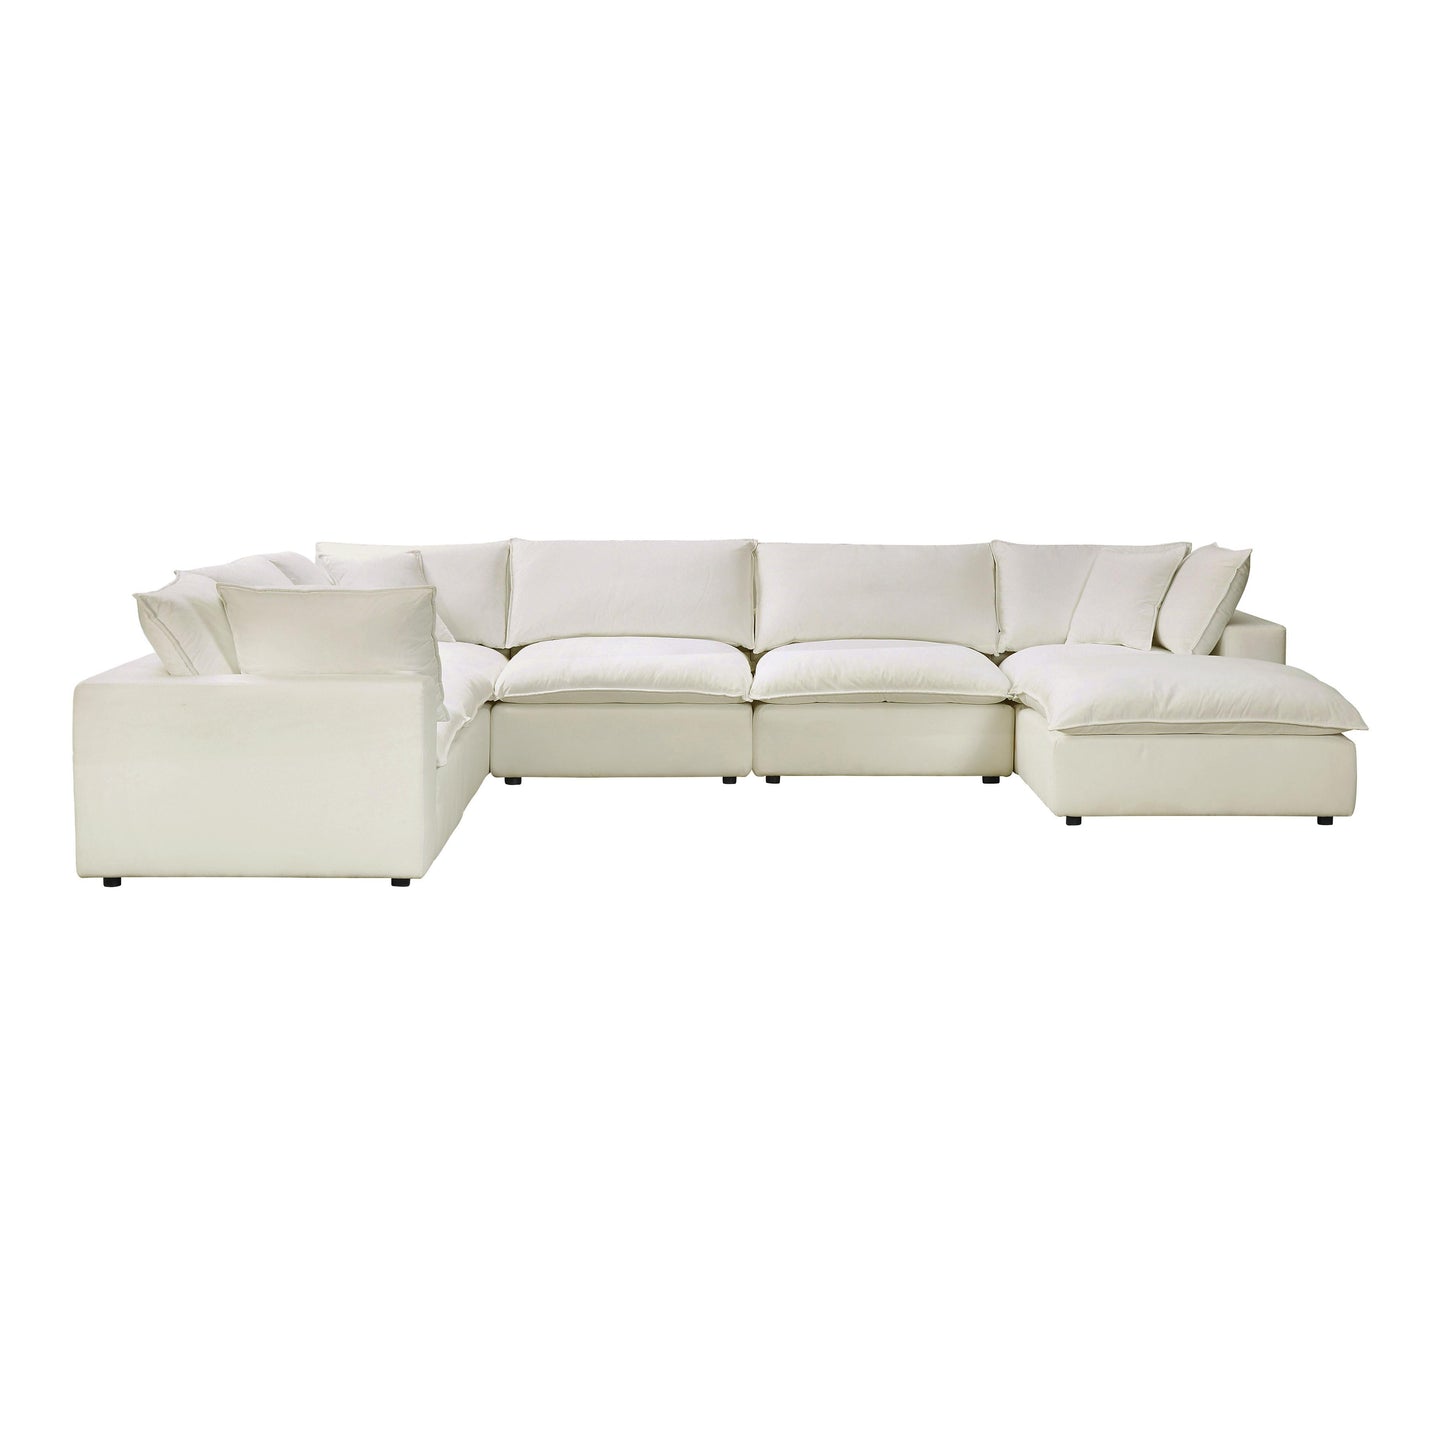 Tov Furniture Cali Natural Modular Large Chaise Sectional